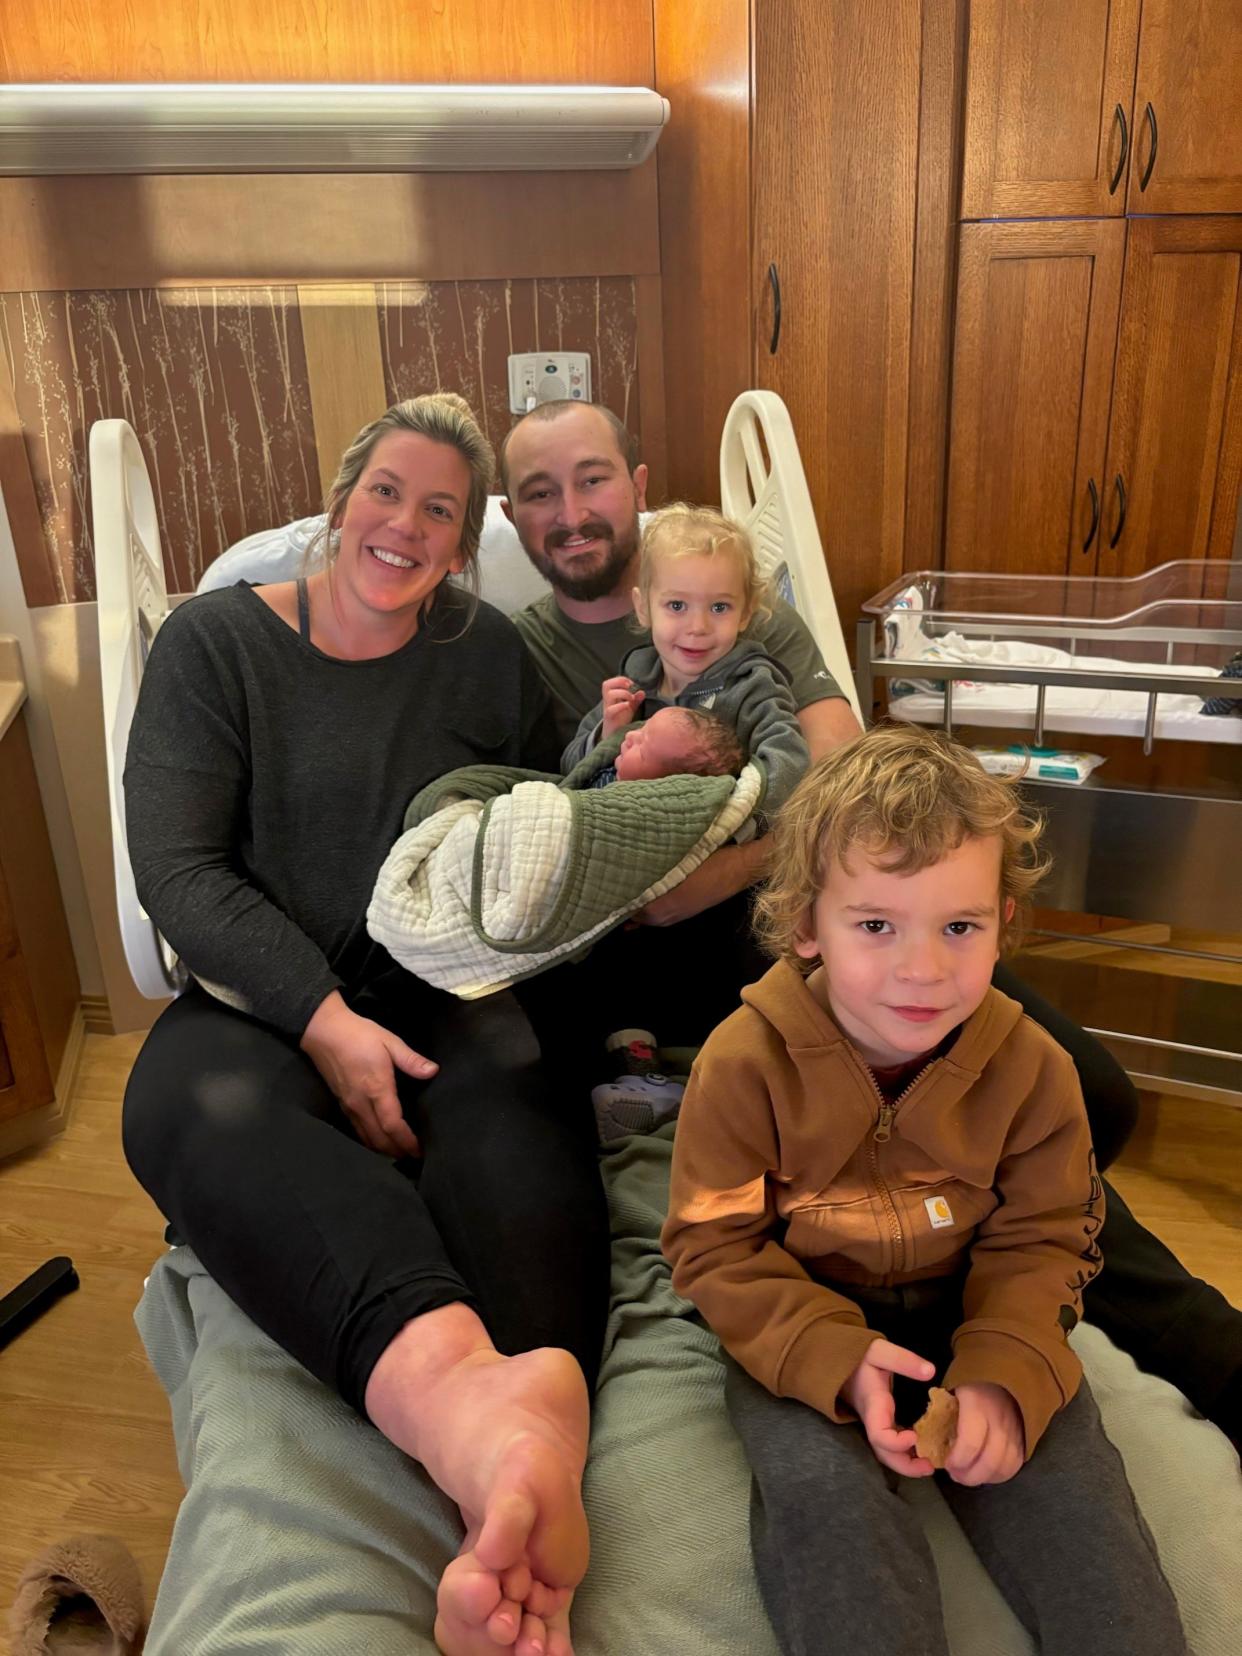 The Hertel family of Belt, Montana welcome their new addition baby Beau, the first to be born at Benefis Health System in 2024. From left to right are Ellyn Hertel, father Kelly Hertel, baby Beau and his sister Josie. Sitting at the foot of the bed is big brother Charlie Hertel.